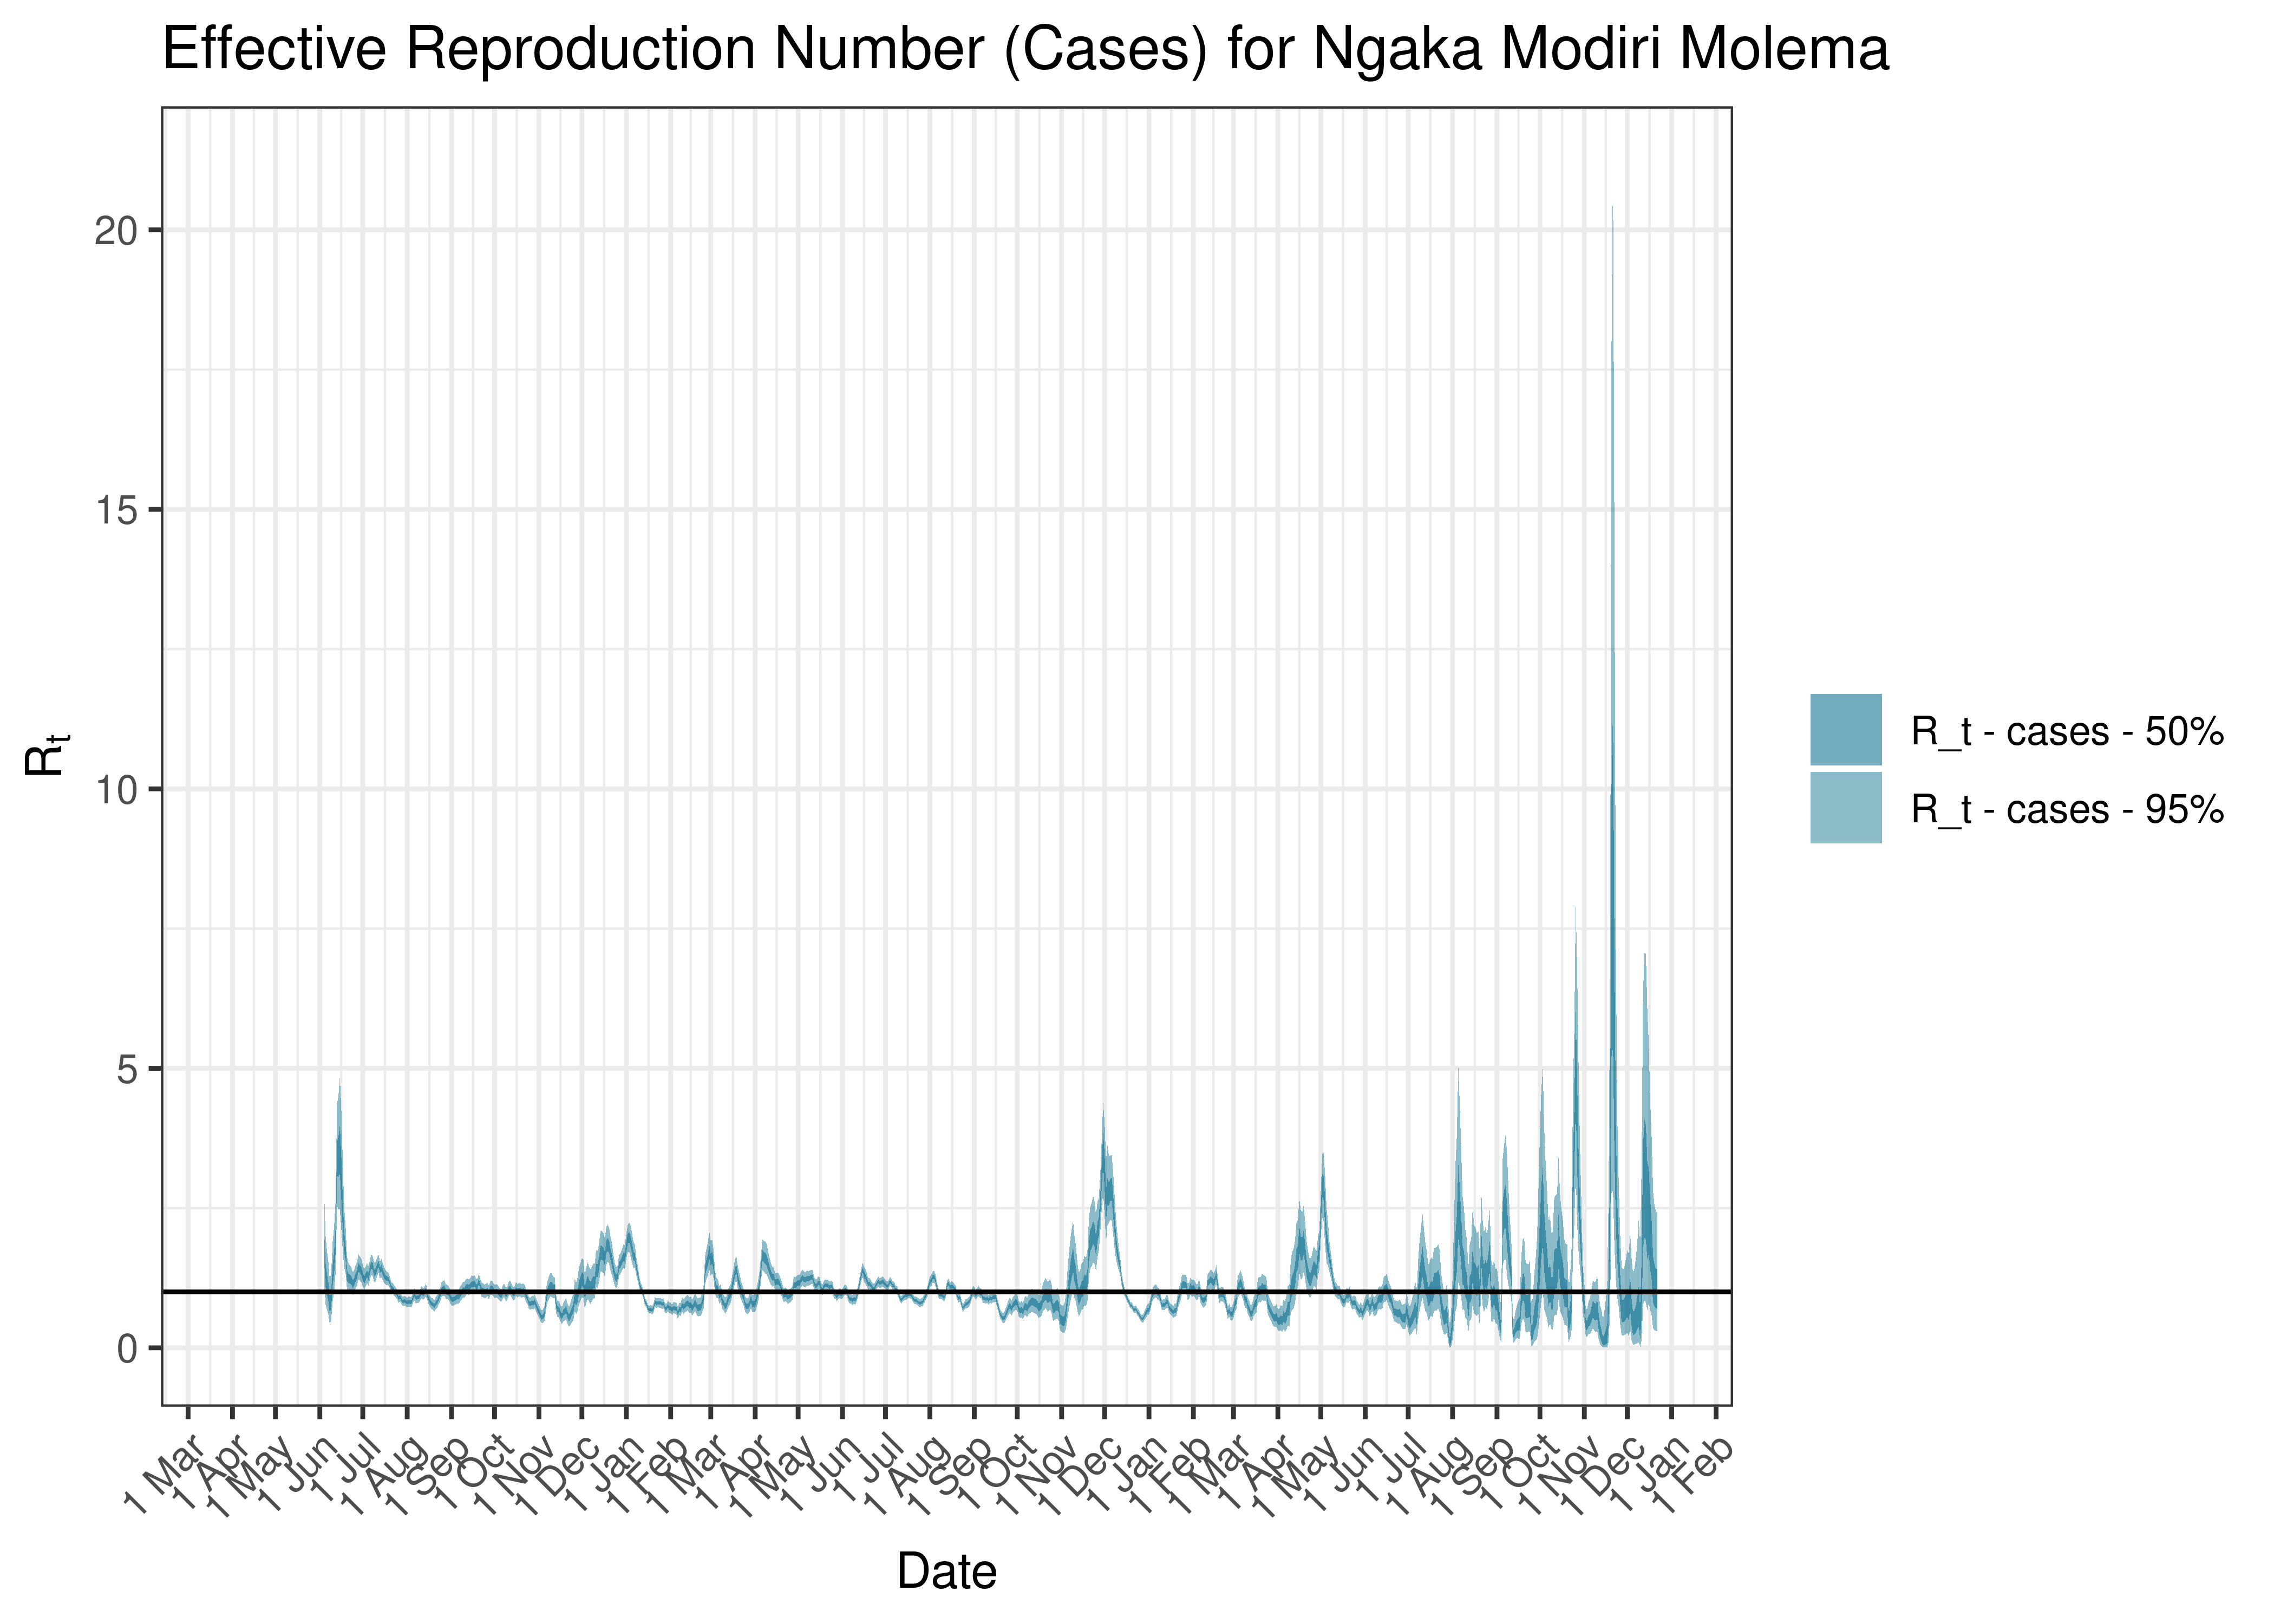 Estimated Effective Reproduction Number Based on Cases for Ngaka Modiri Molema since 1 April 2020